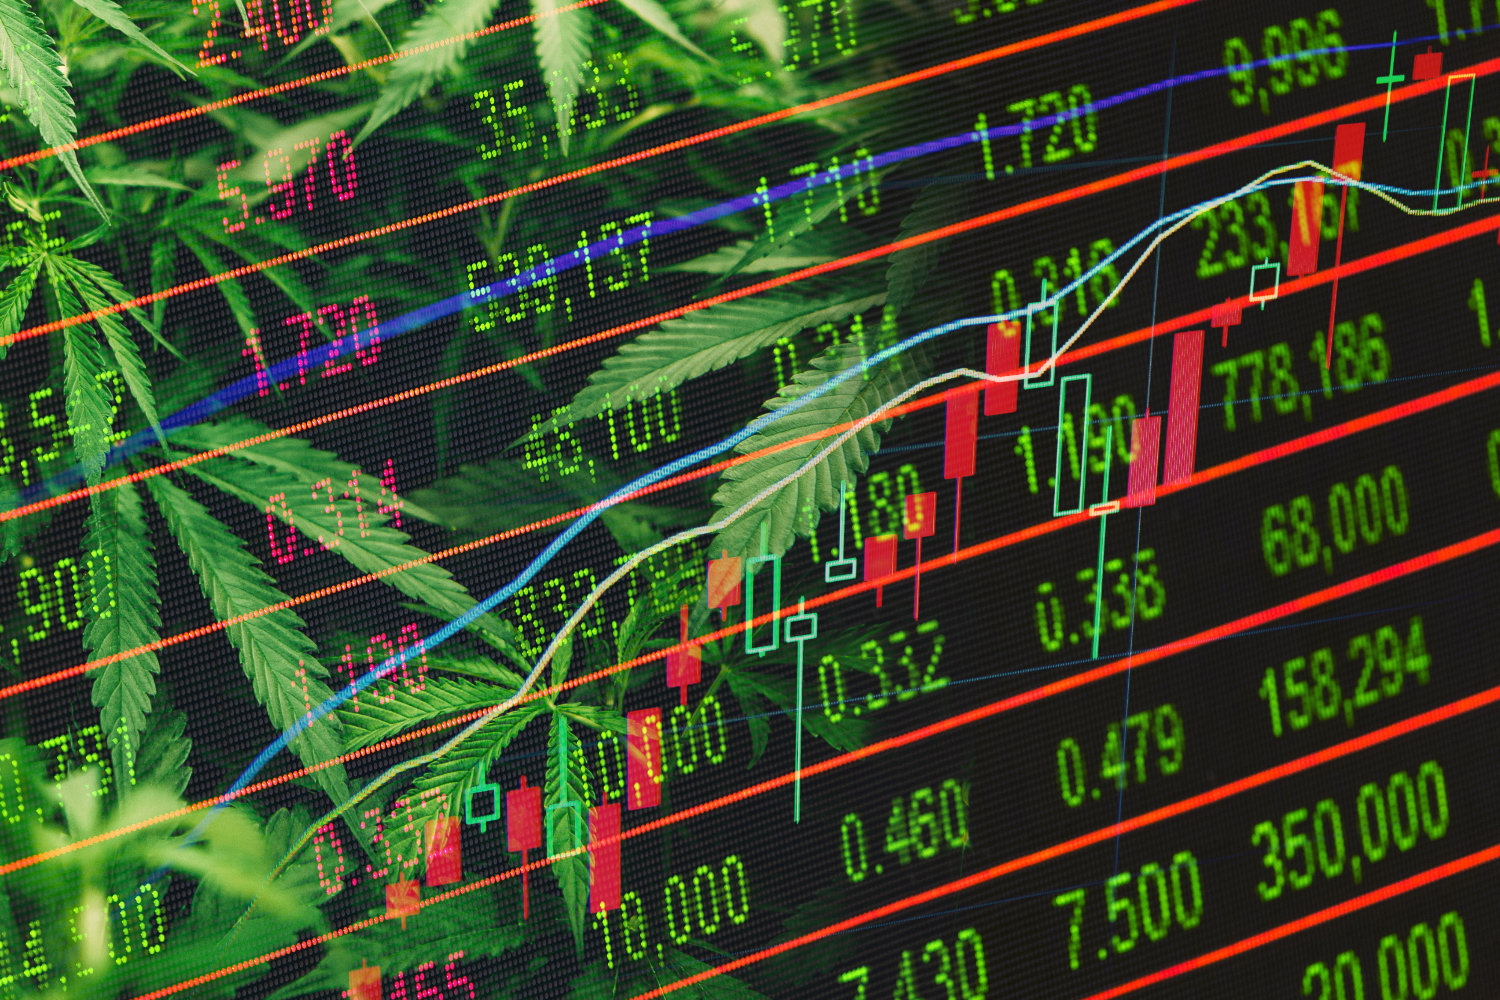 4 Things to Consider When Investing in Cannabis Stocks